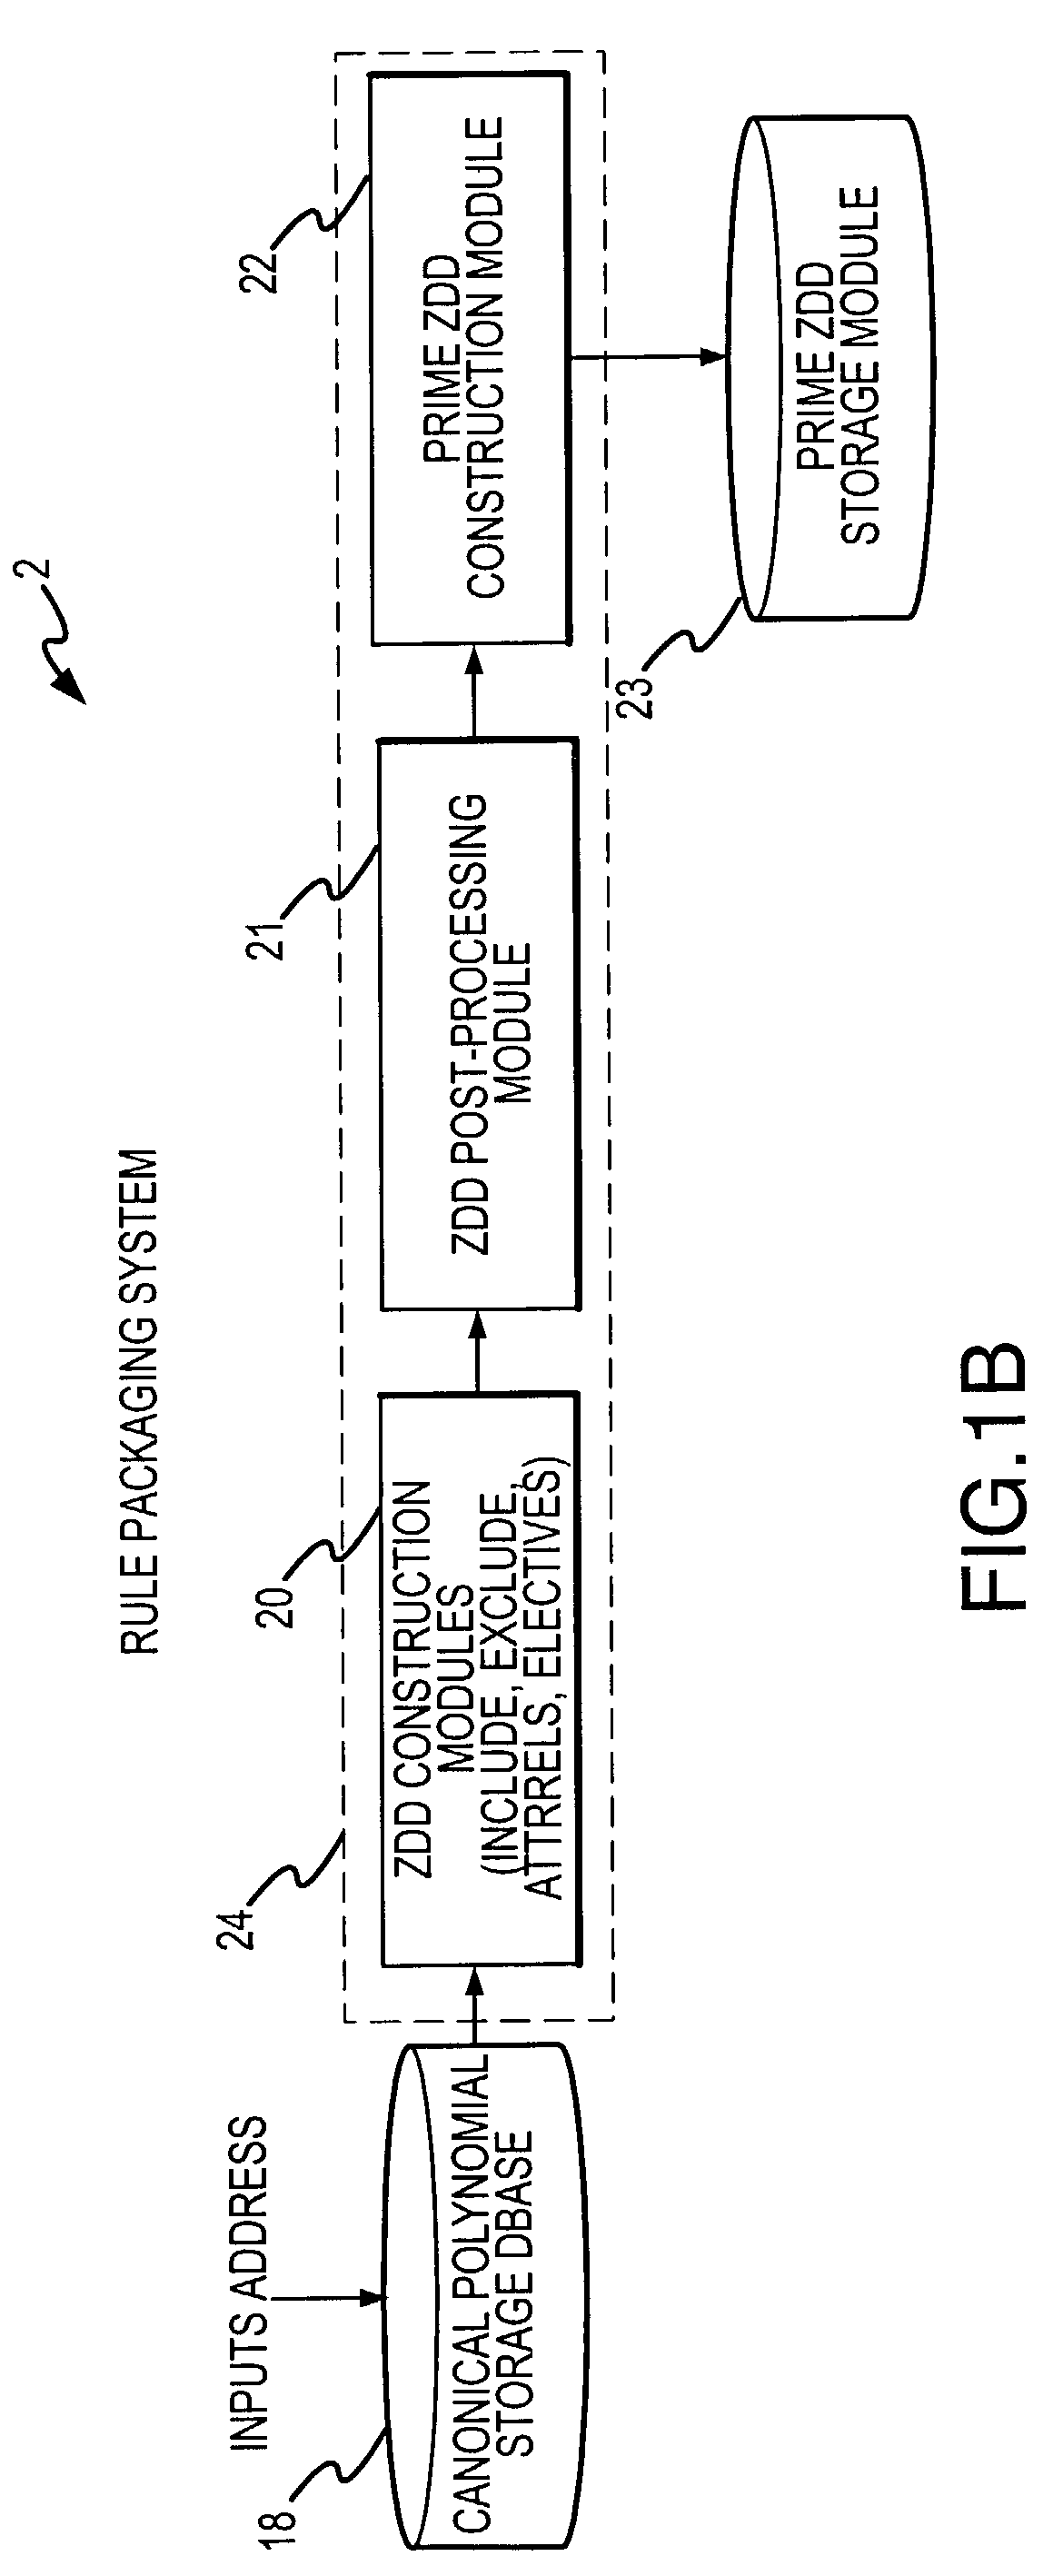 Method and system for capturing business rules for automated decision procession